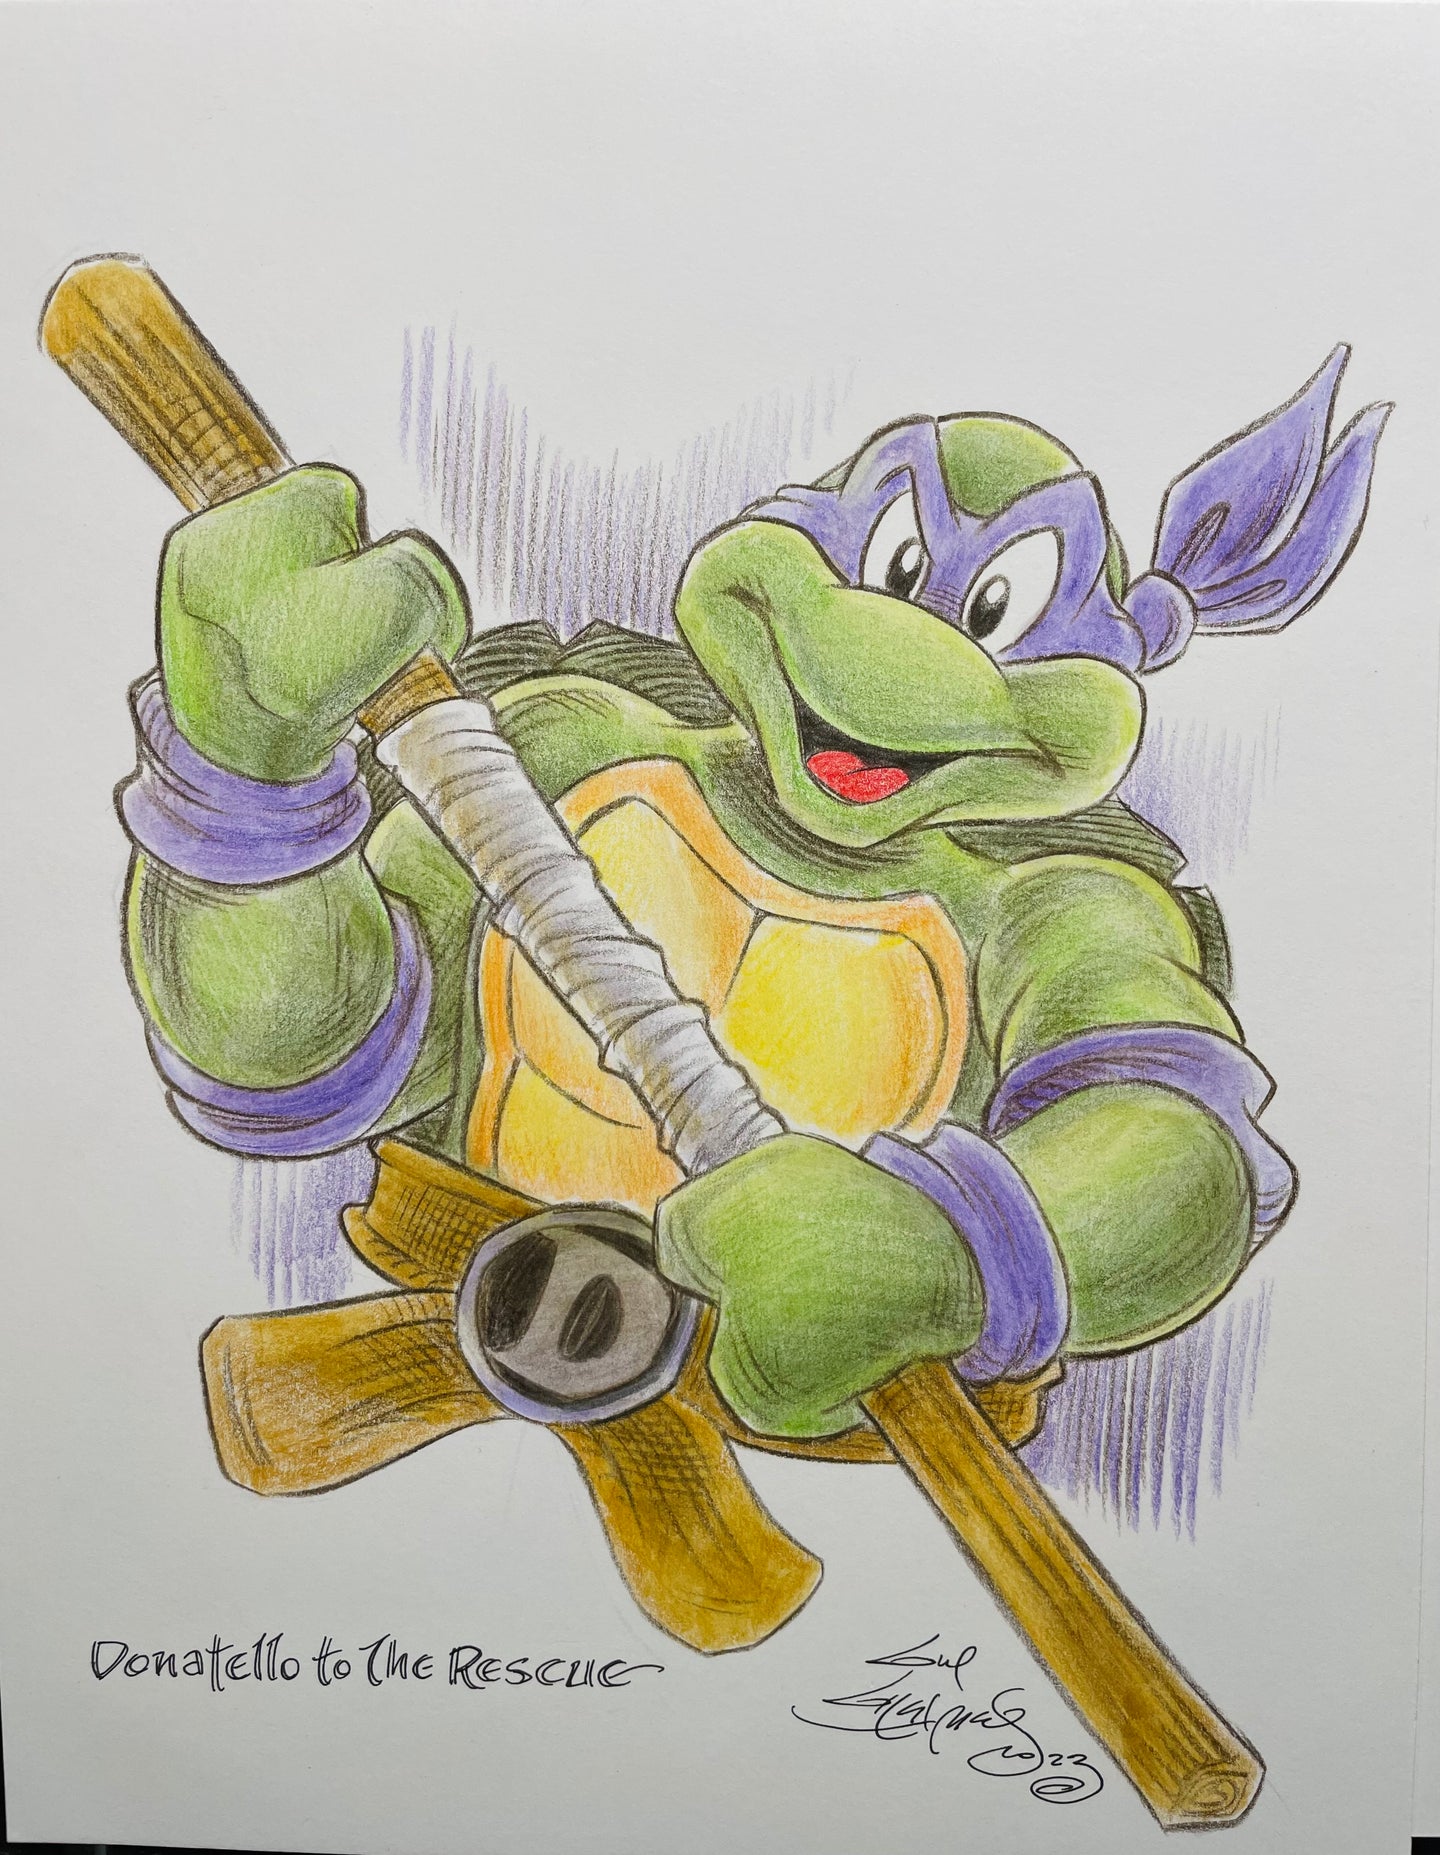 Donny TMNT Original Art 8.5x11 Sketch  - Created by Guy Gilchrist